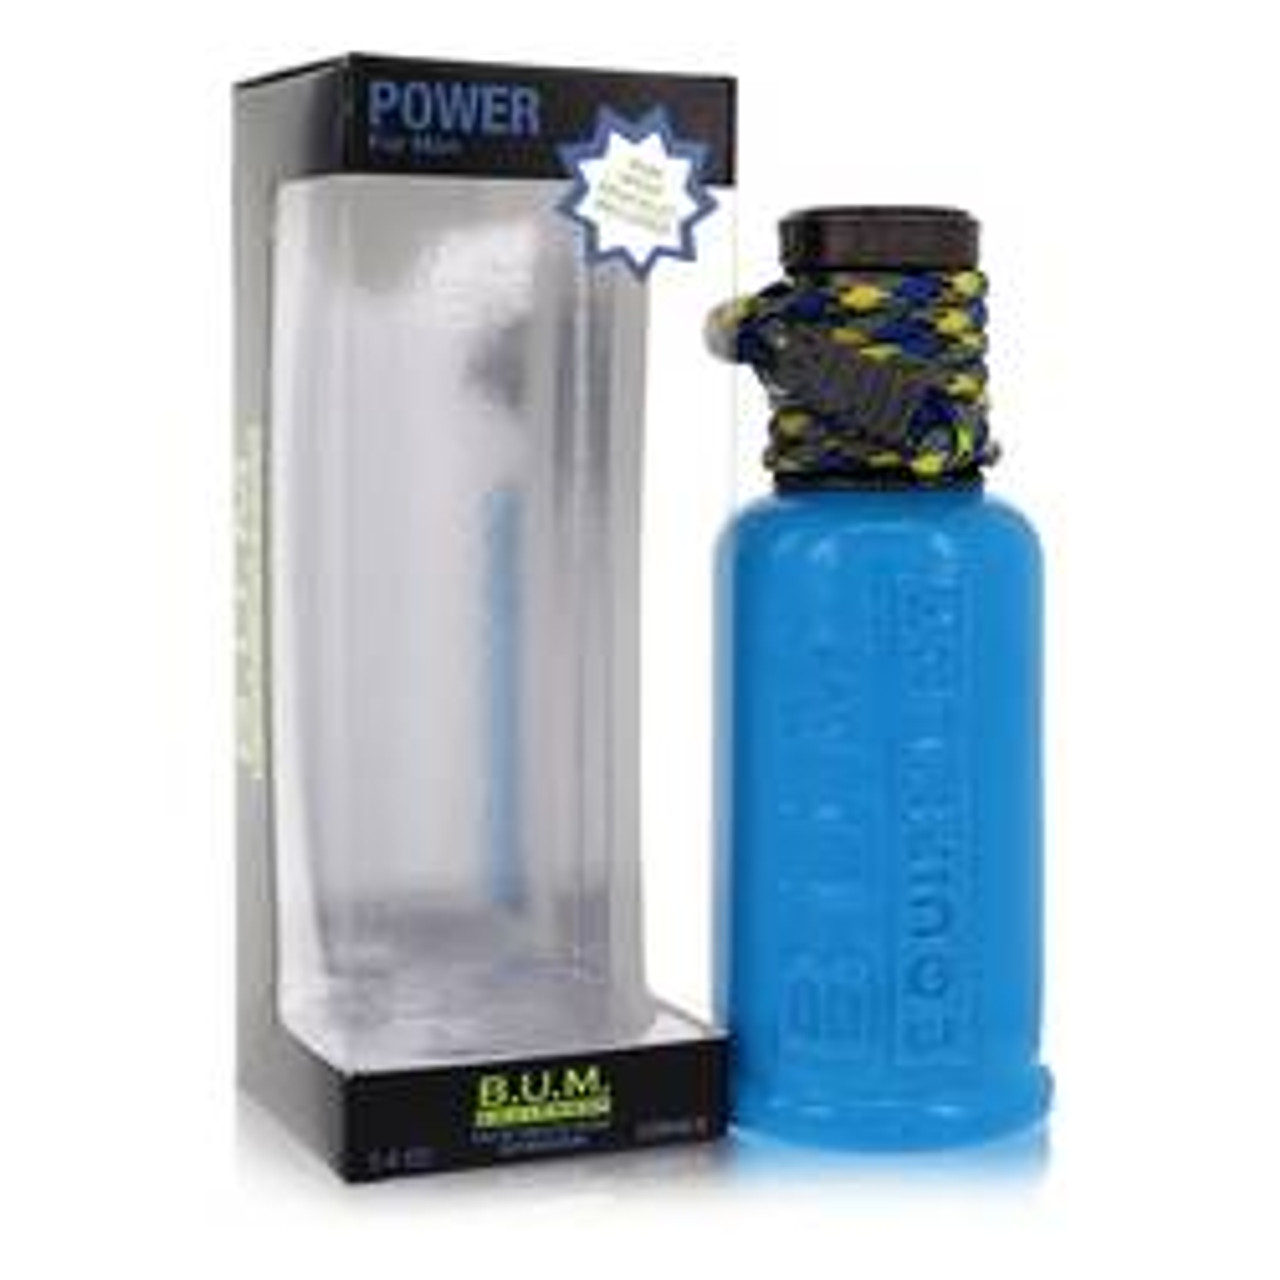 Bum Power Cologne By Bum Equipment Eau De Toilette Spray 3.4 oz for Men - [From 23.00 - Choose pk Qty ] - *Ships from Miami